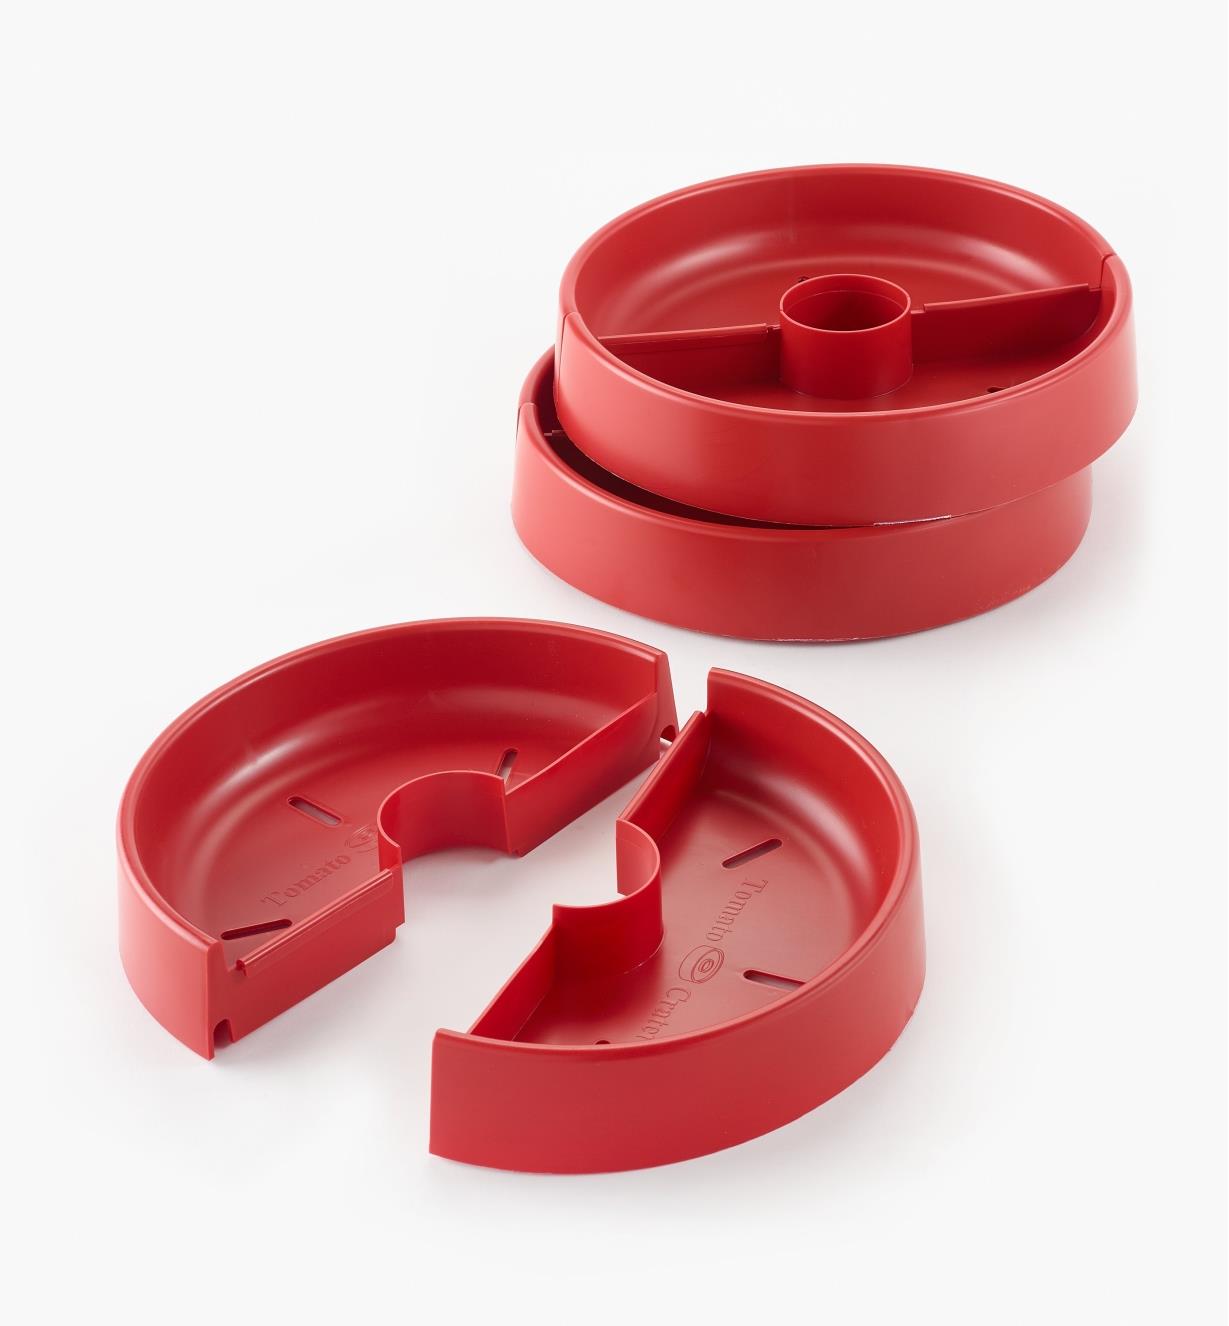 SG101 - Tomato Craters, set of 3